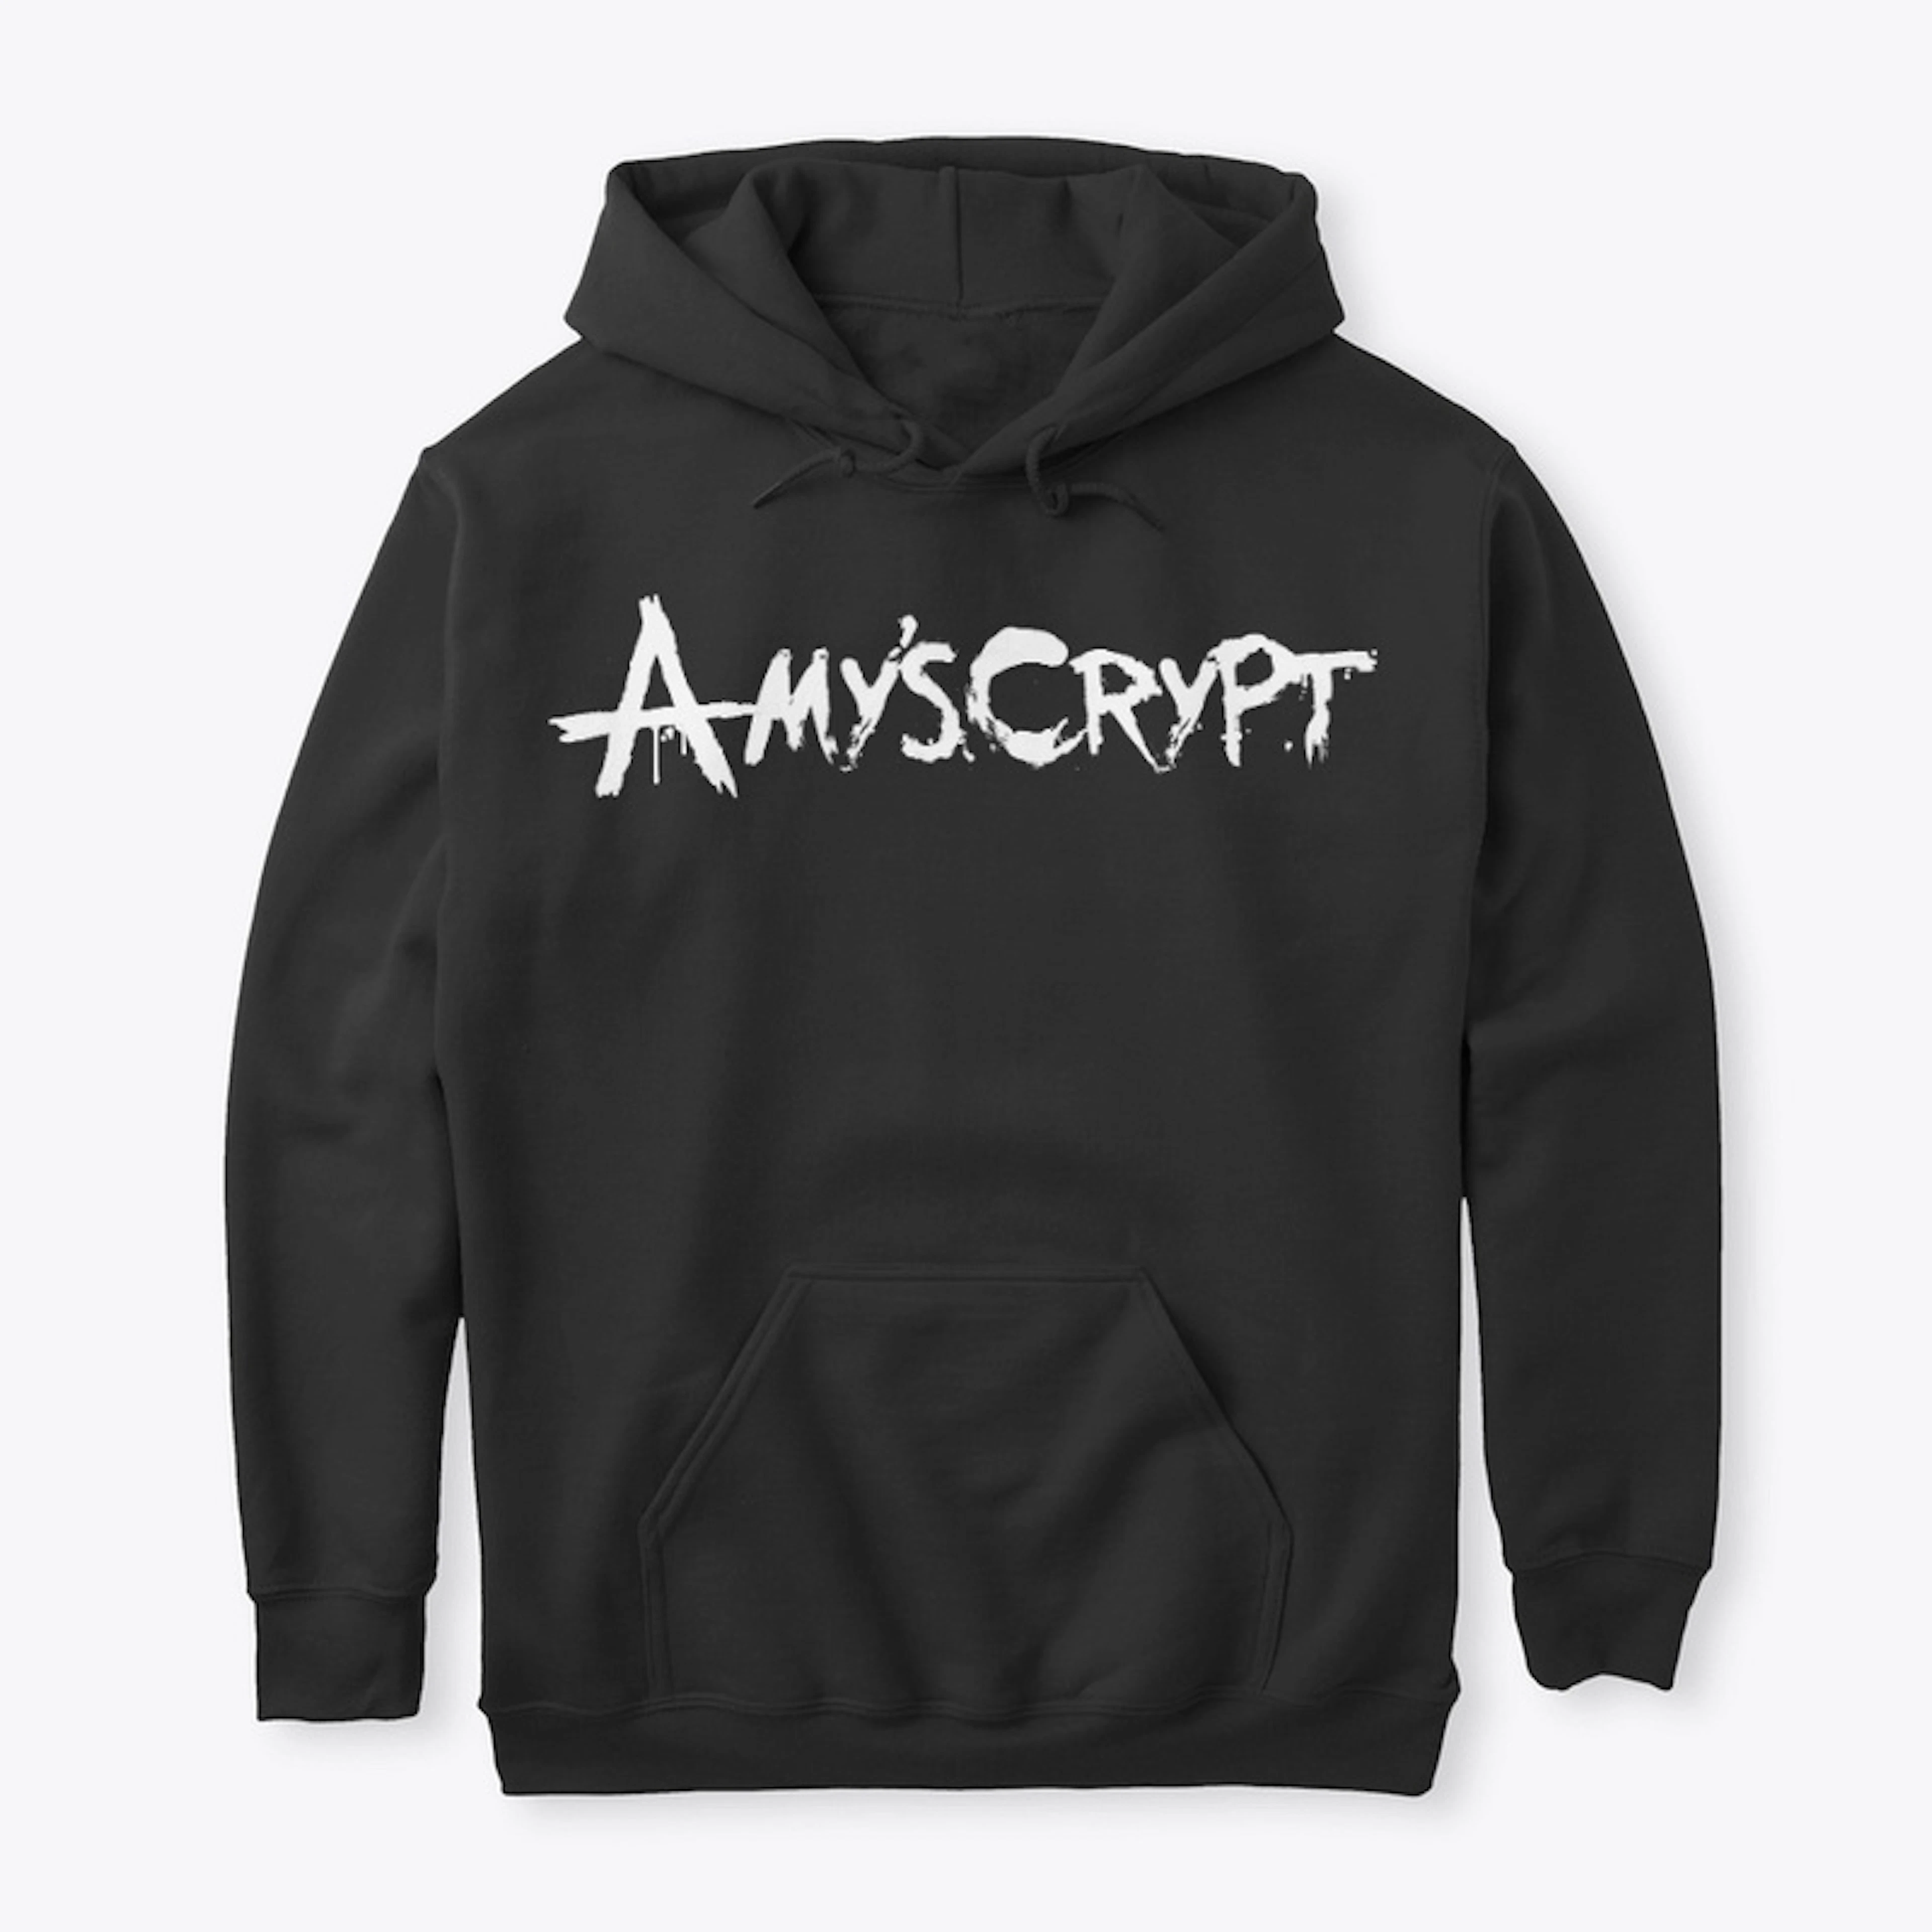 Amy's Crypt Adult's Hoodie